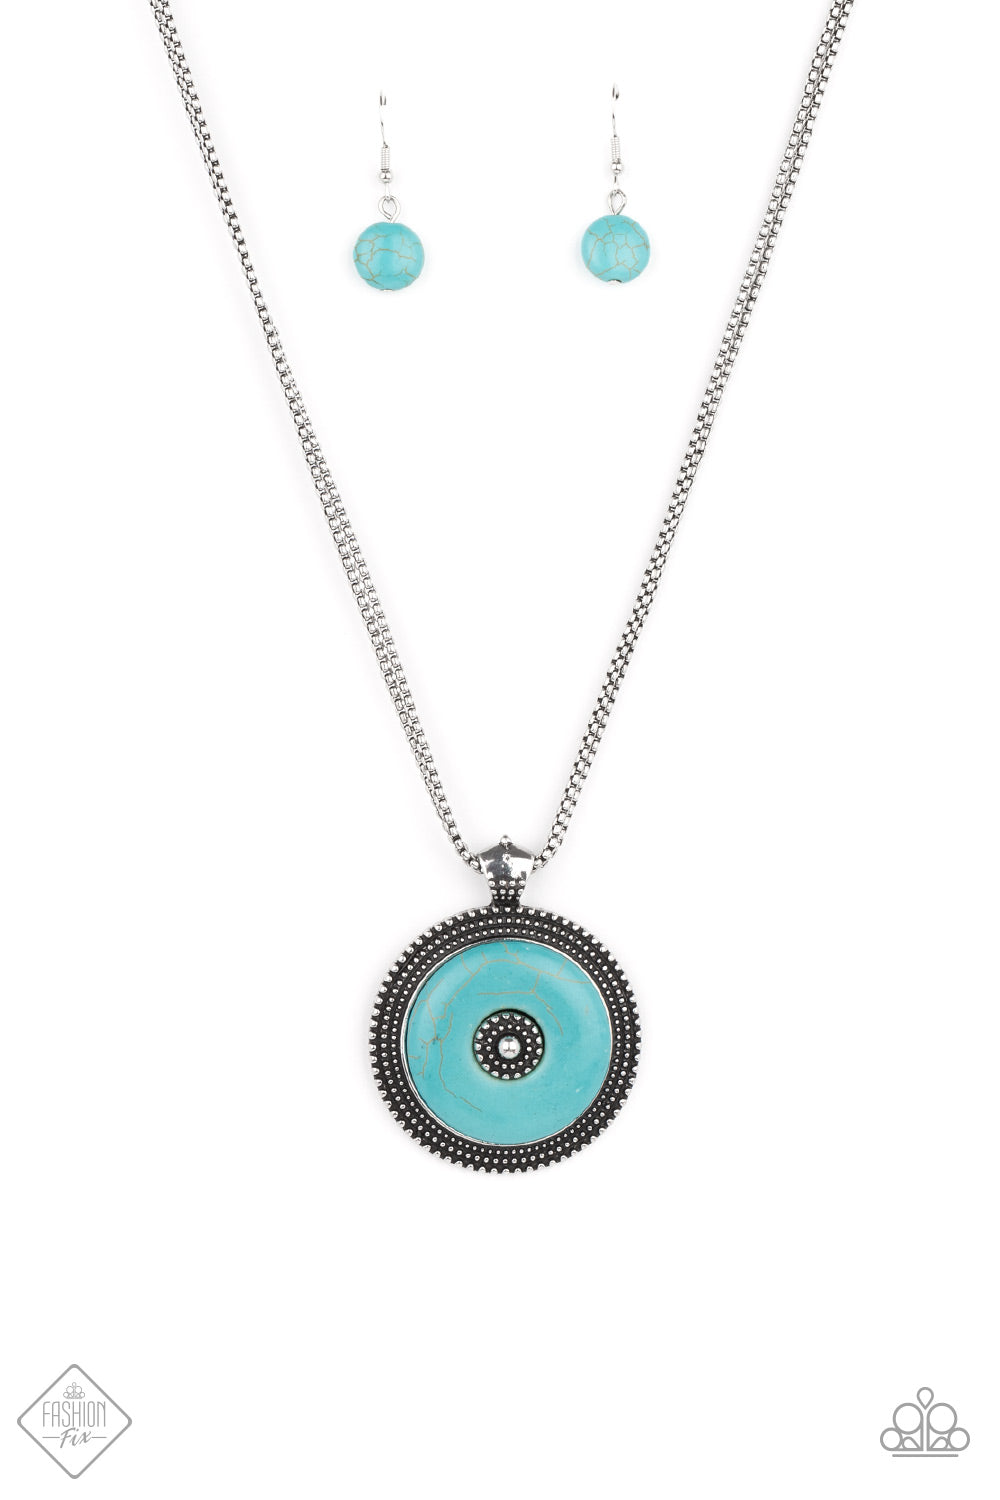 Epicenter of Attention Necklace (Blue, White)